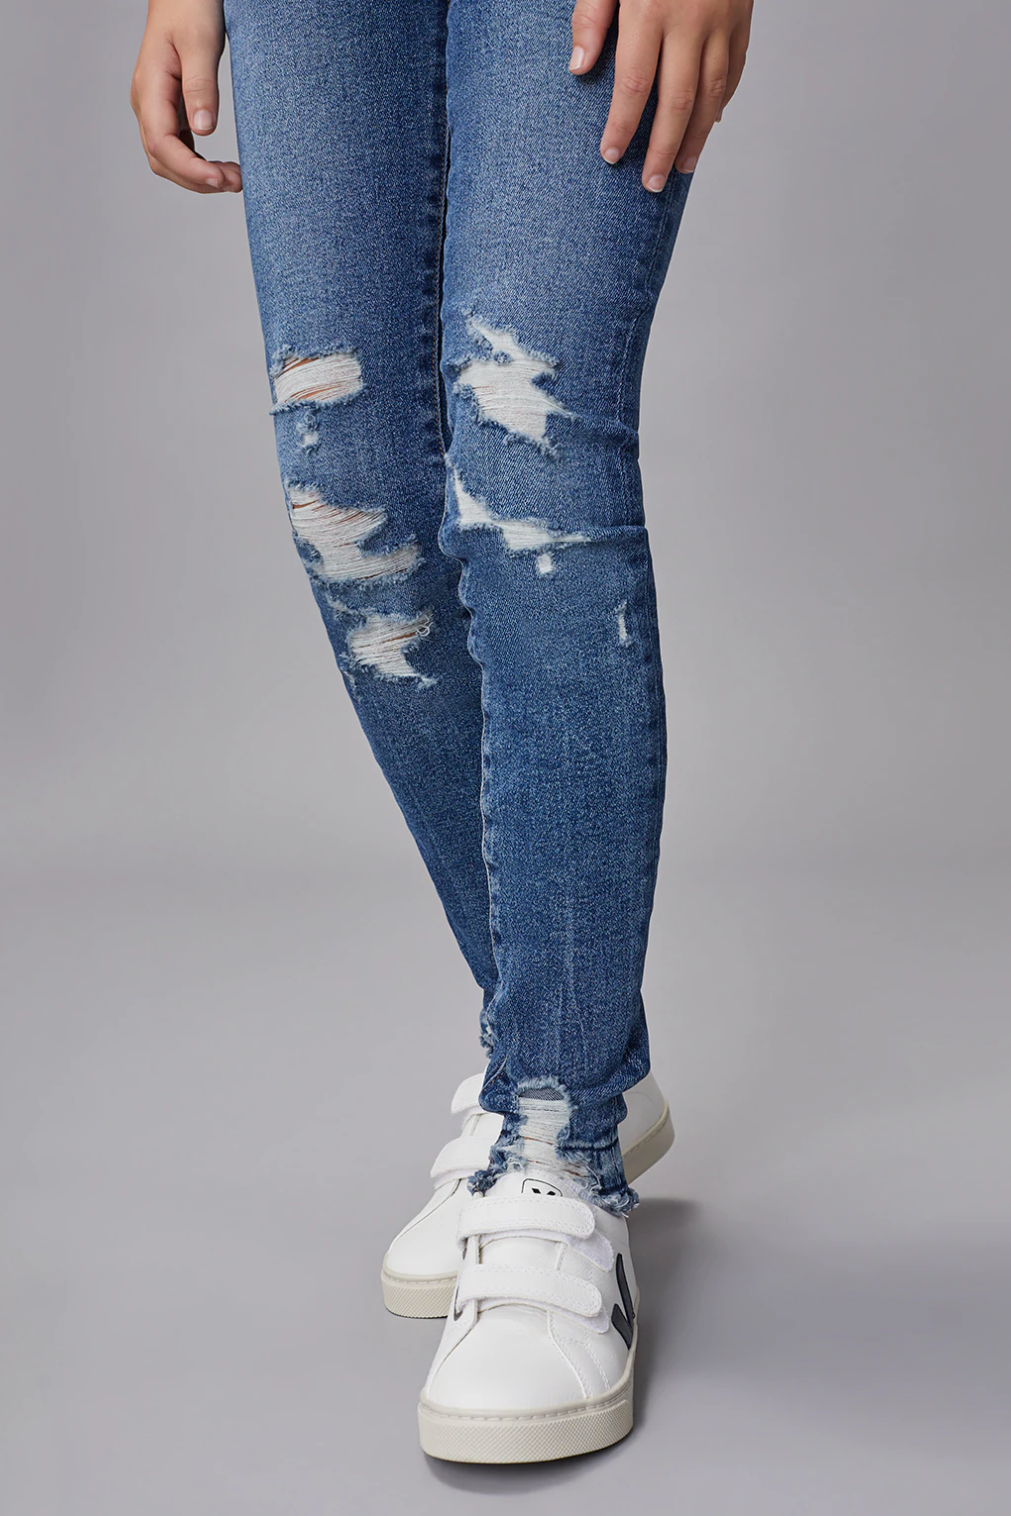 The Chloe Distressed Skinny Jeans in Riptide by DL1961